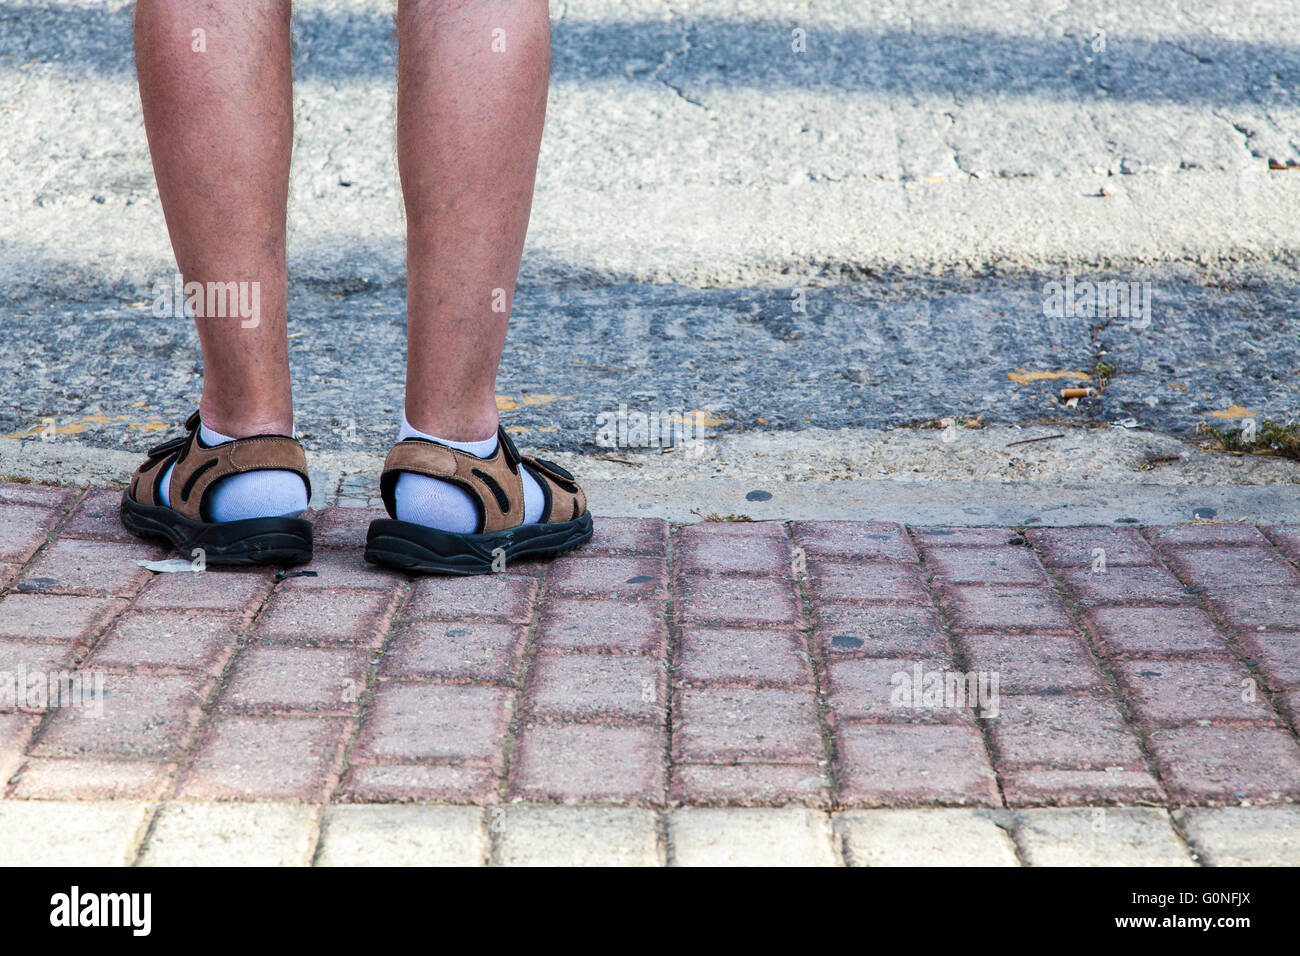 Funny unstyilish feet covered with socks and sandals Stock Photo - Alamy